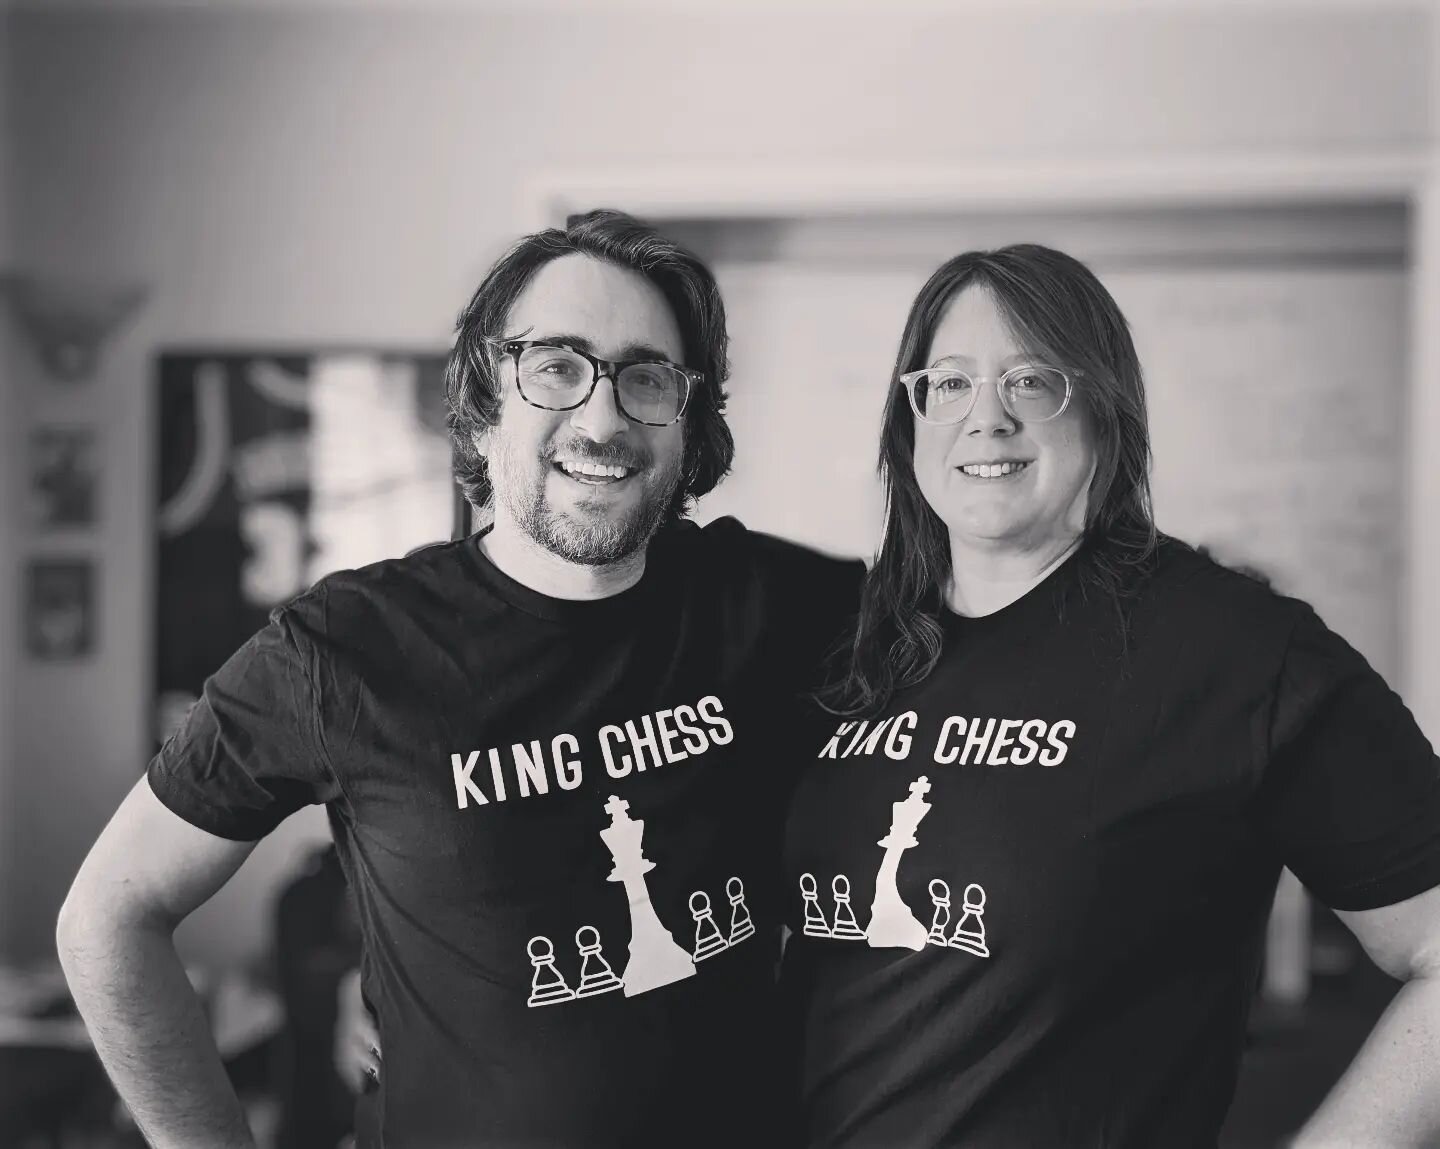 King Chess shirts are in! Get them at kingchessfilm.com